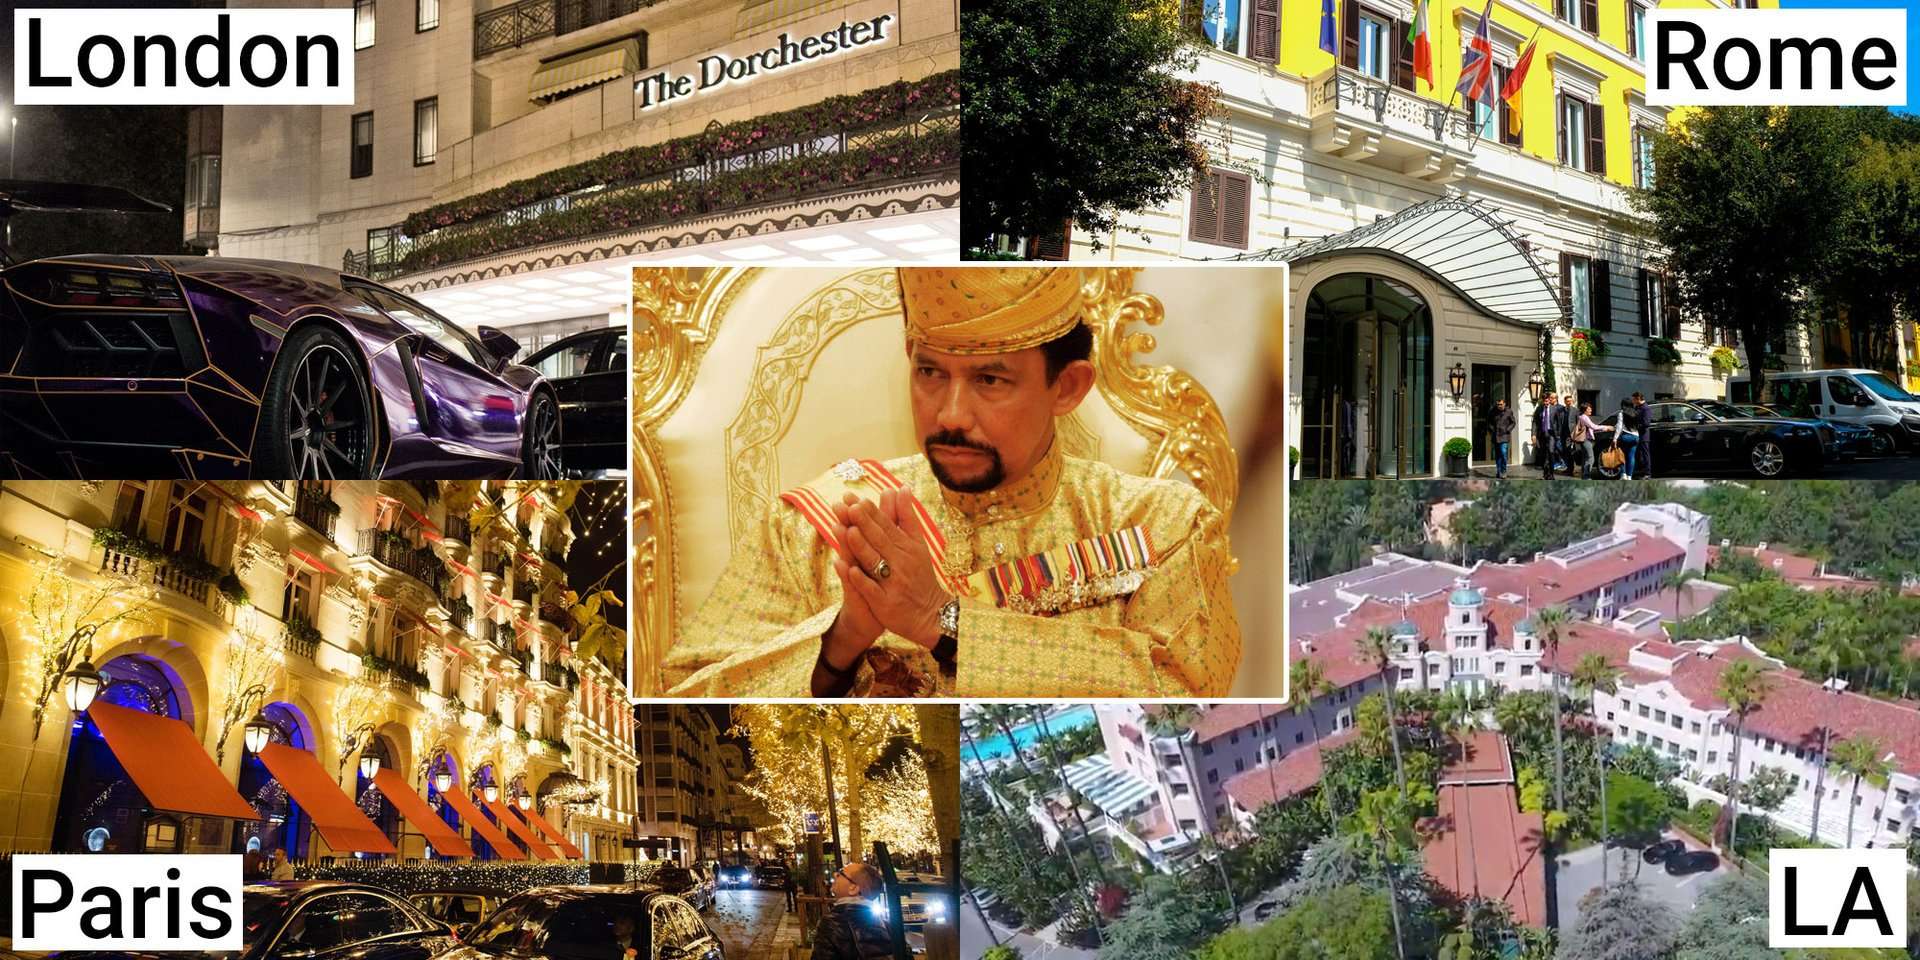 image for 5-star hotels owned by the sultan of Brunei deleted their social media after an intense backlash over Brunei's new law punishing homosexuality with death by stoning